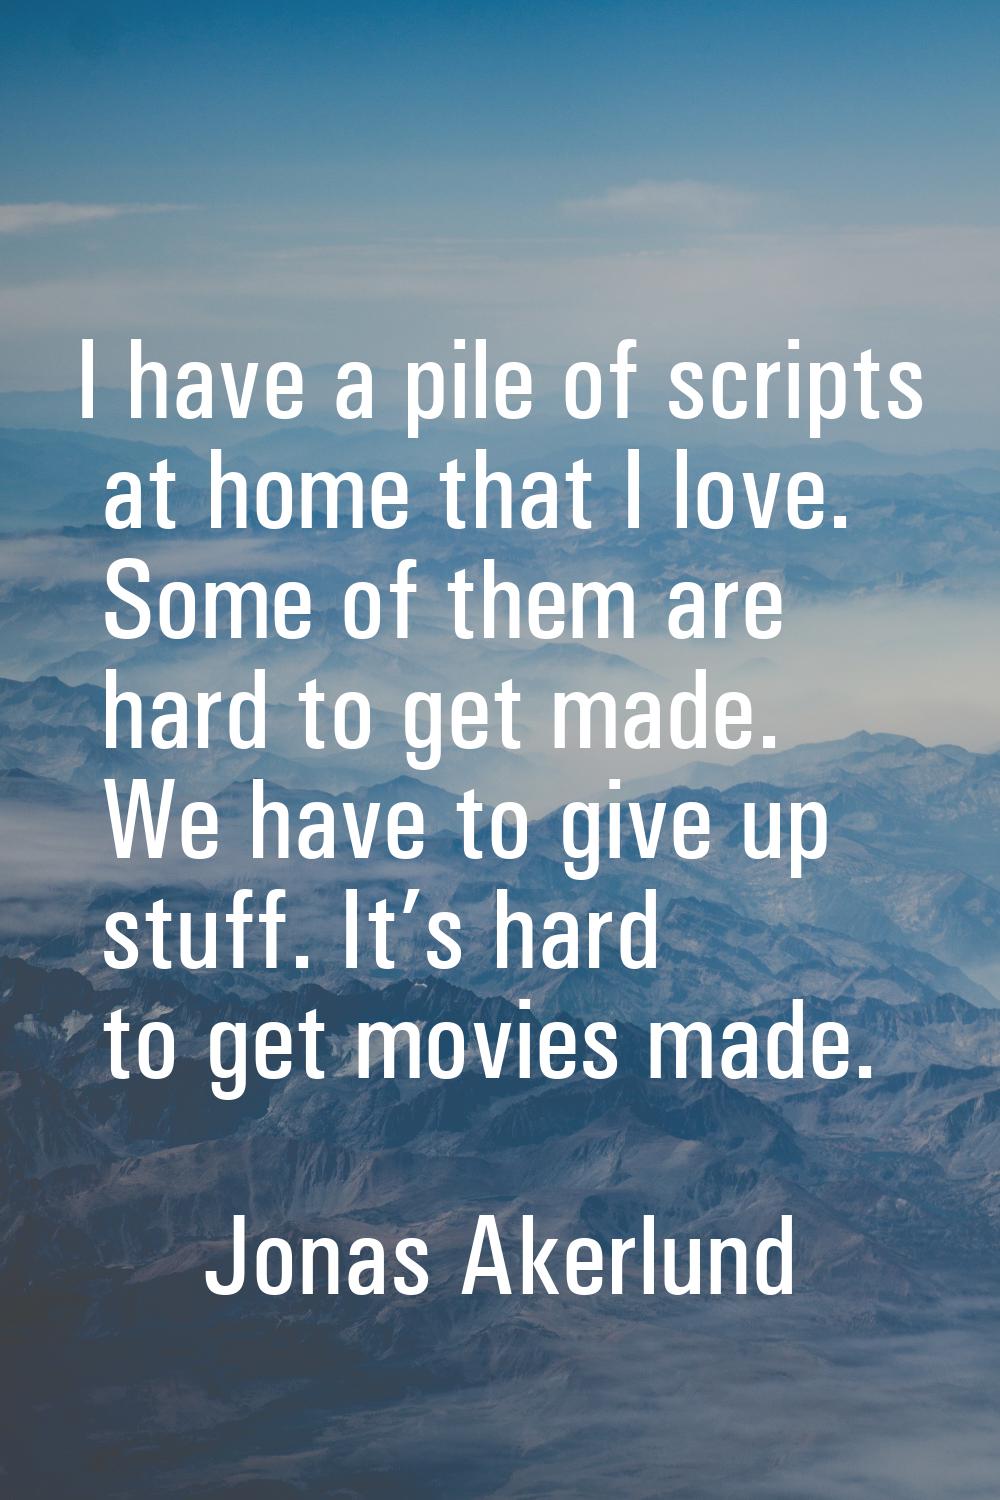 I have a pile of scripts at home that I love. Some of them are hard to get made. We have to give up